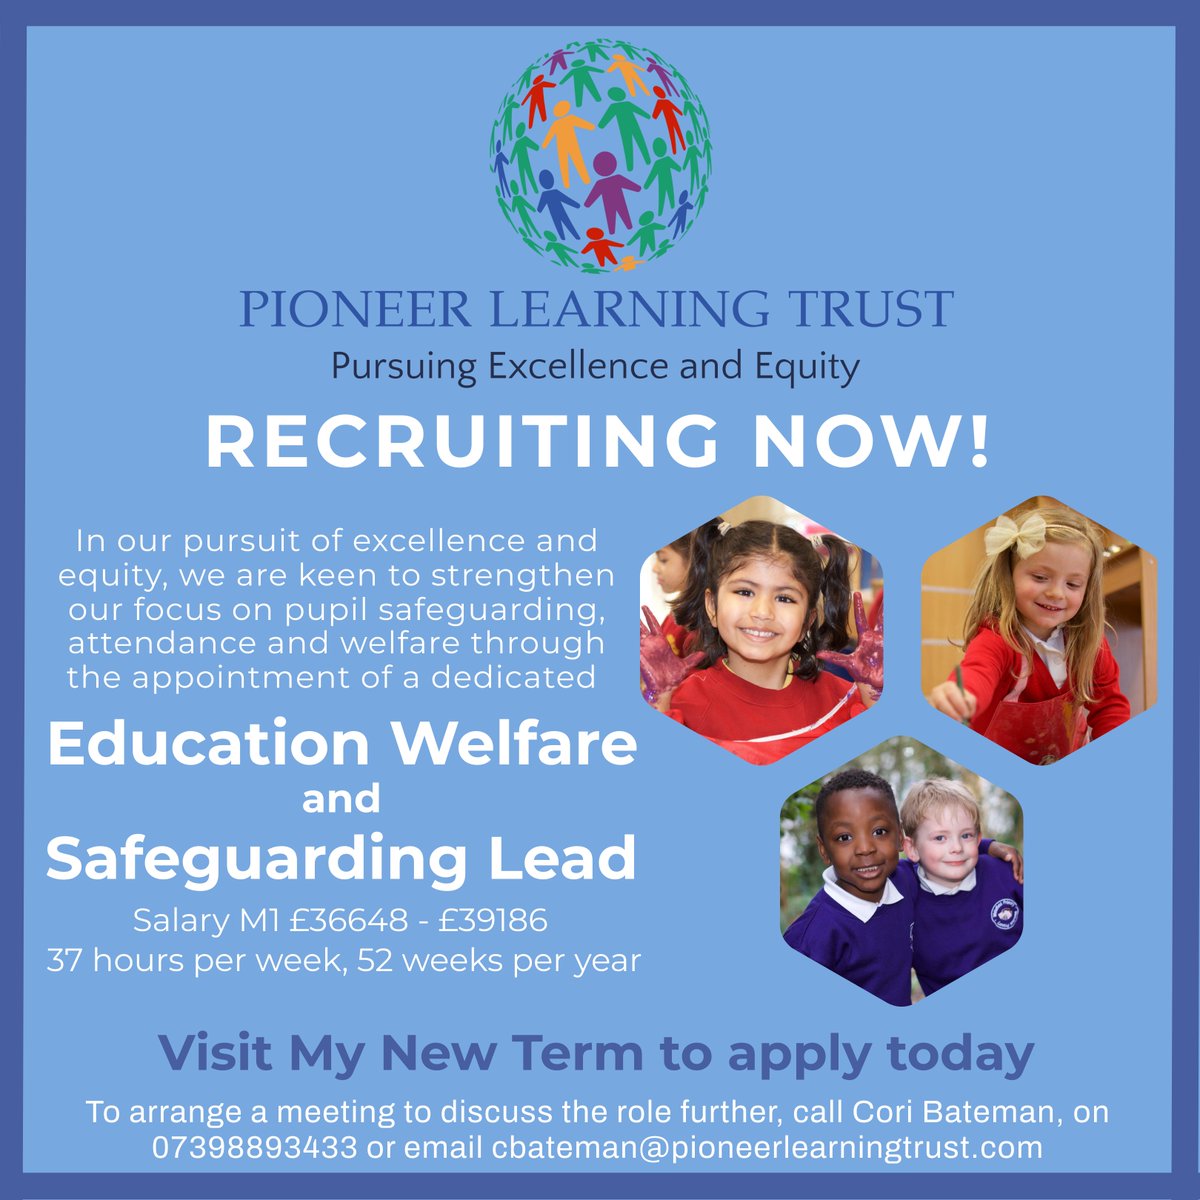 Our schools are keen to appoint an experienced professional with expertise in attendance and education welfare along with excellent knowledge and understanding of safeguarding children. Contact @corisande1 to arrange a conversation to discuss the role. #PioneerPromise #values